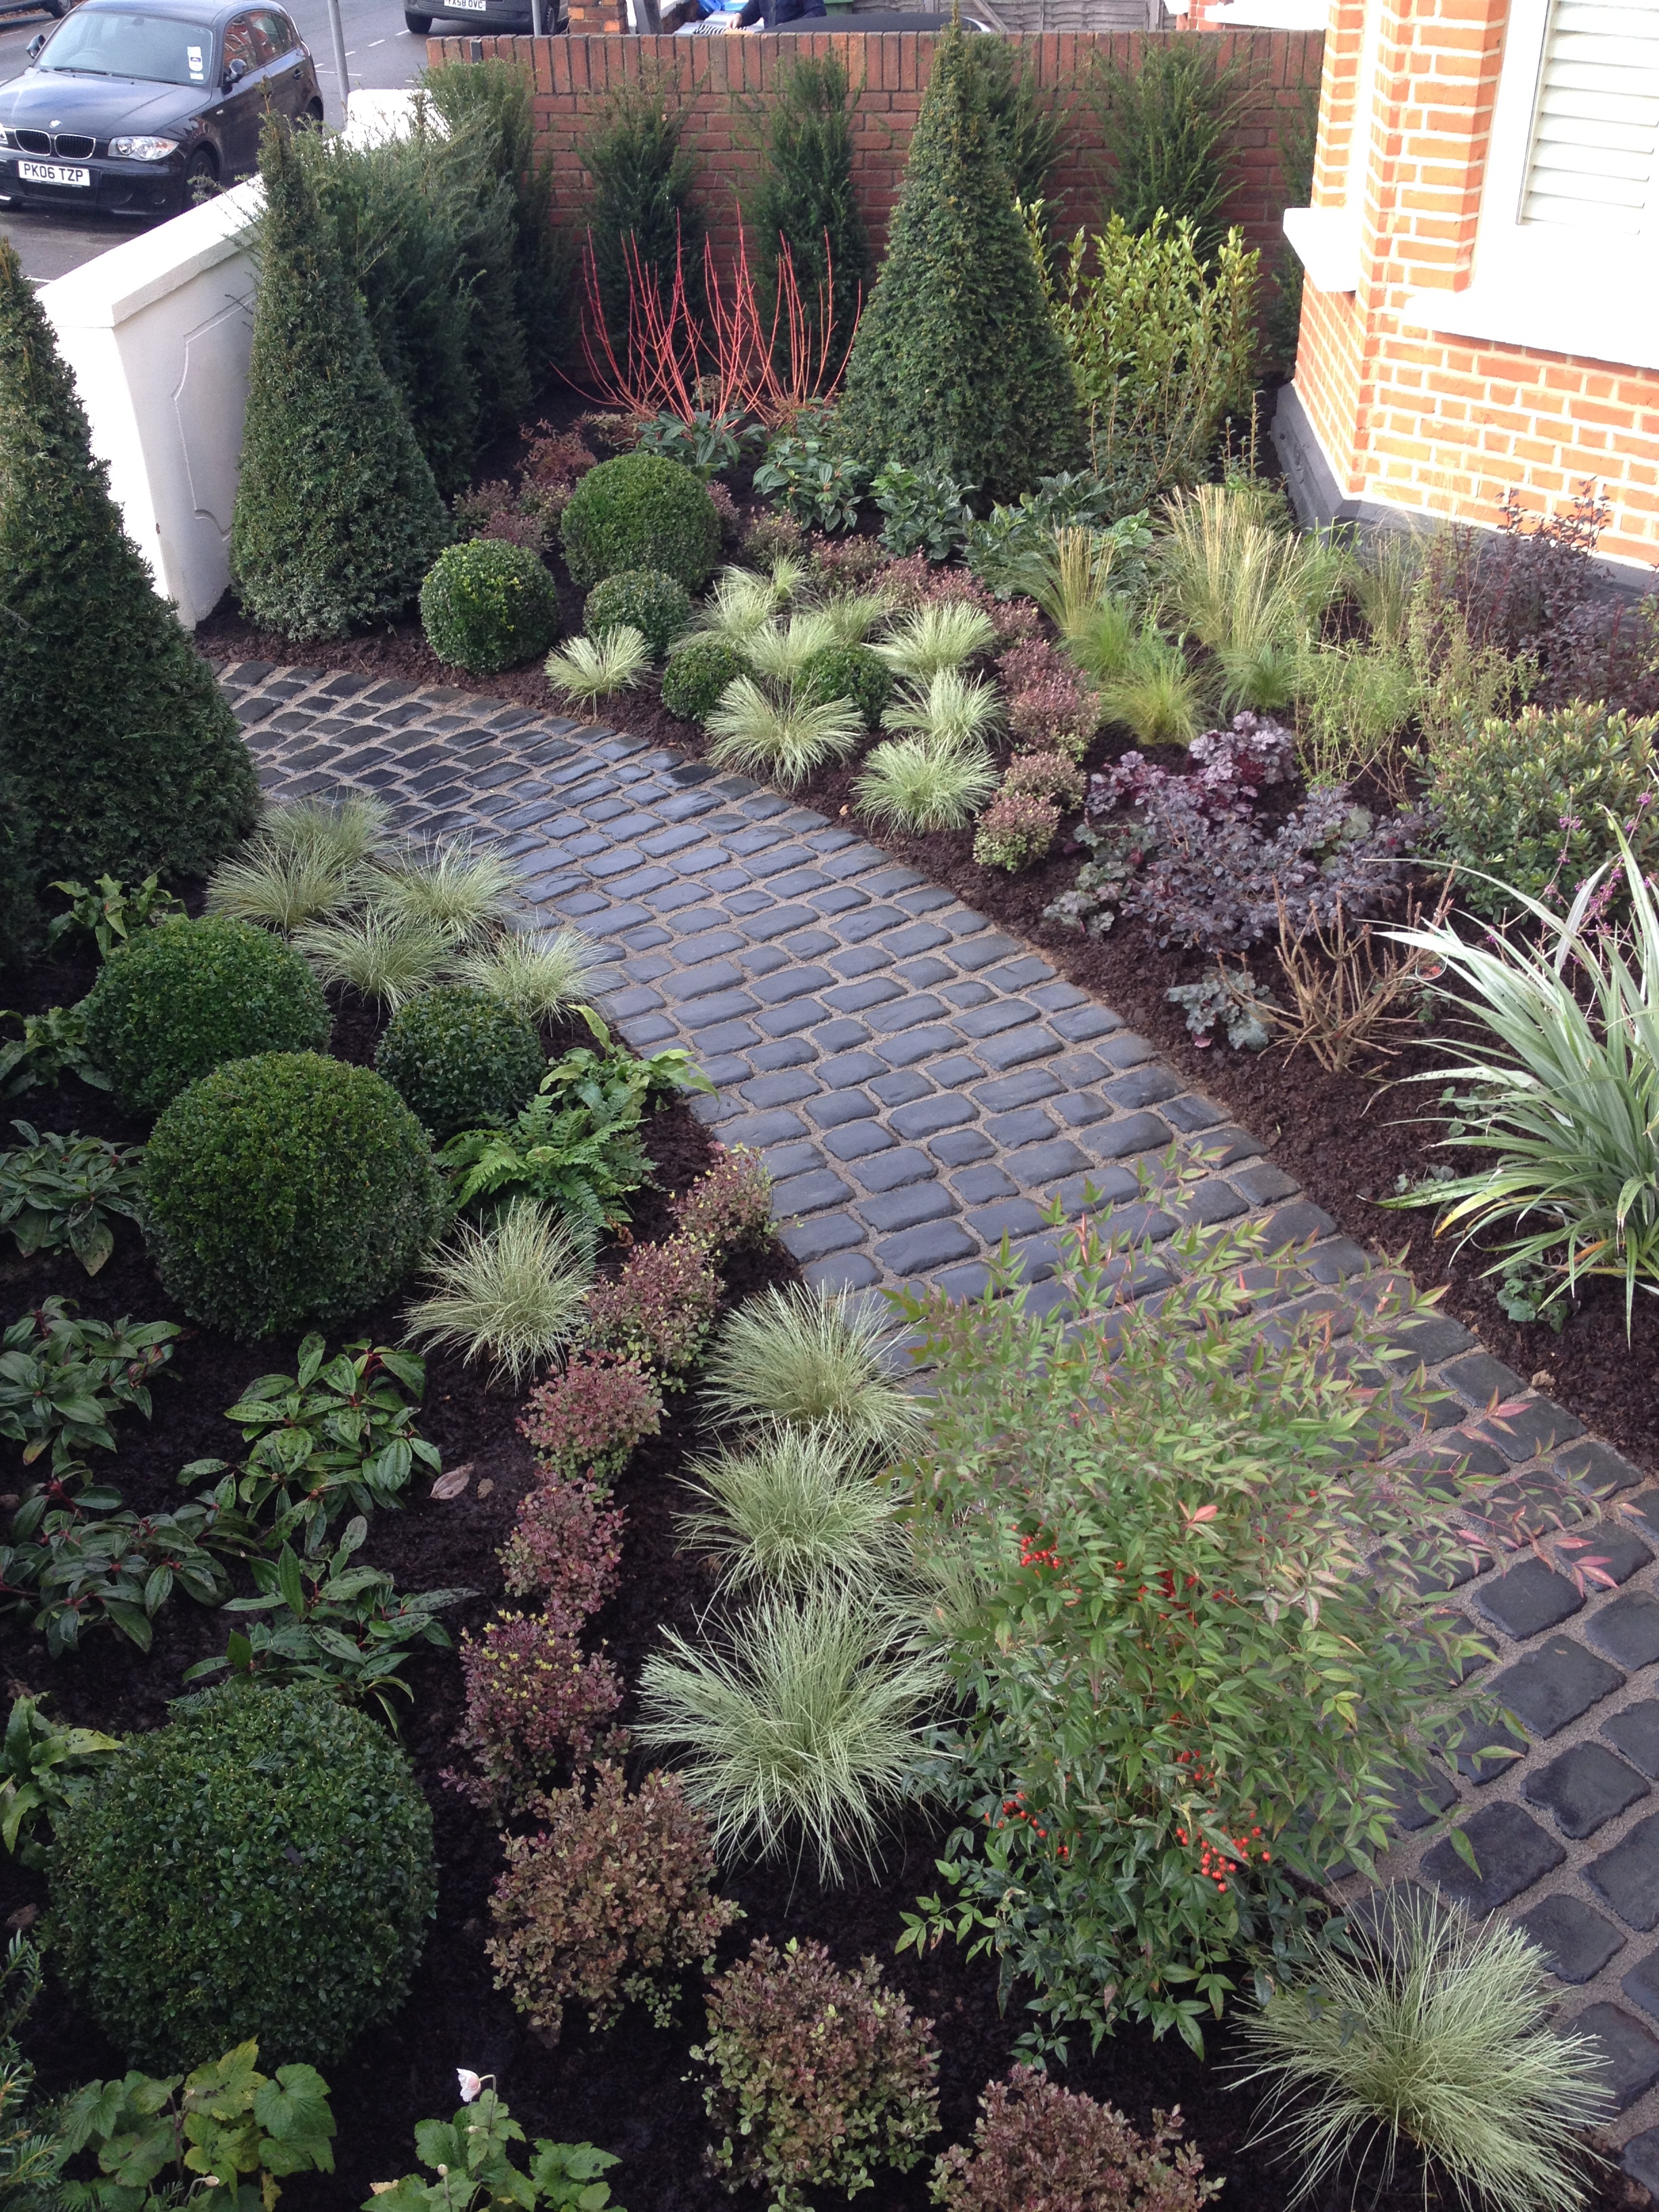 </p> <p>Find your ideal home design pro on designfor-me.com - get matched and see who's interested in your home project. Click image to see more inspiration from our design pros</p> <p>Design by Daryl, garden designer from Gravesham</p> <p> #gardendesign #gardeninspiration #gardenlove #gardenideas #gardens </p> <p>